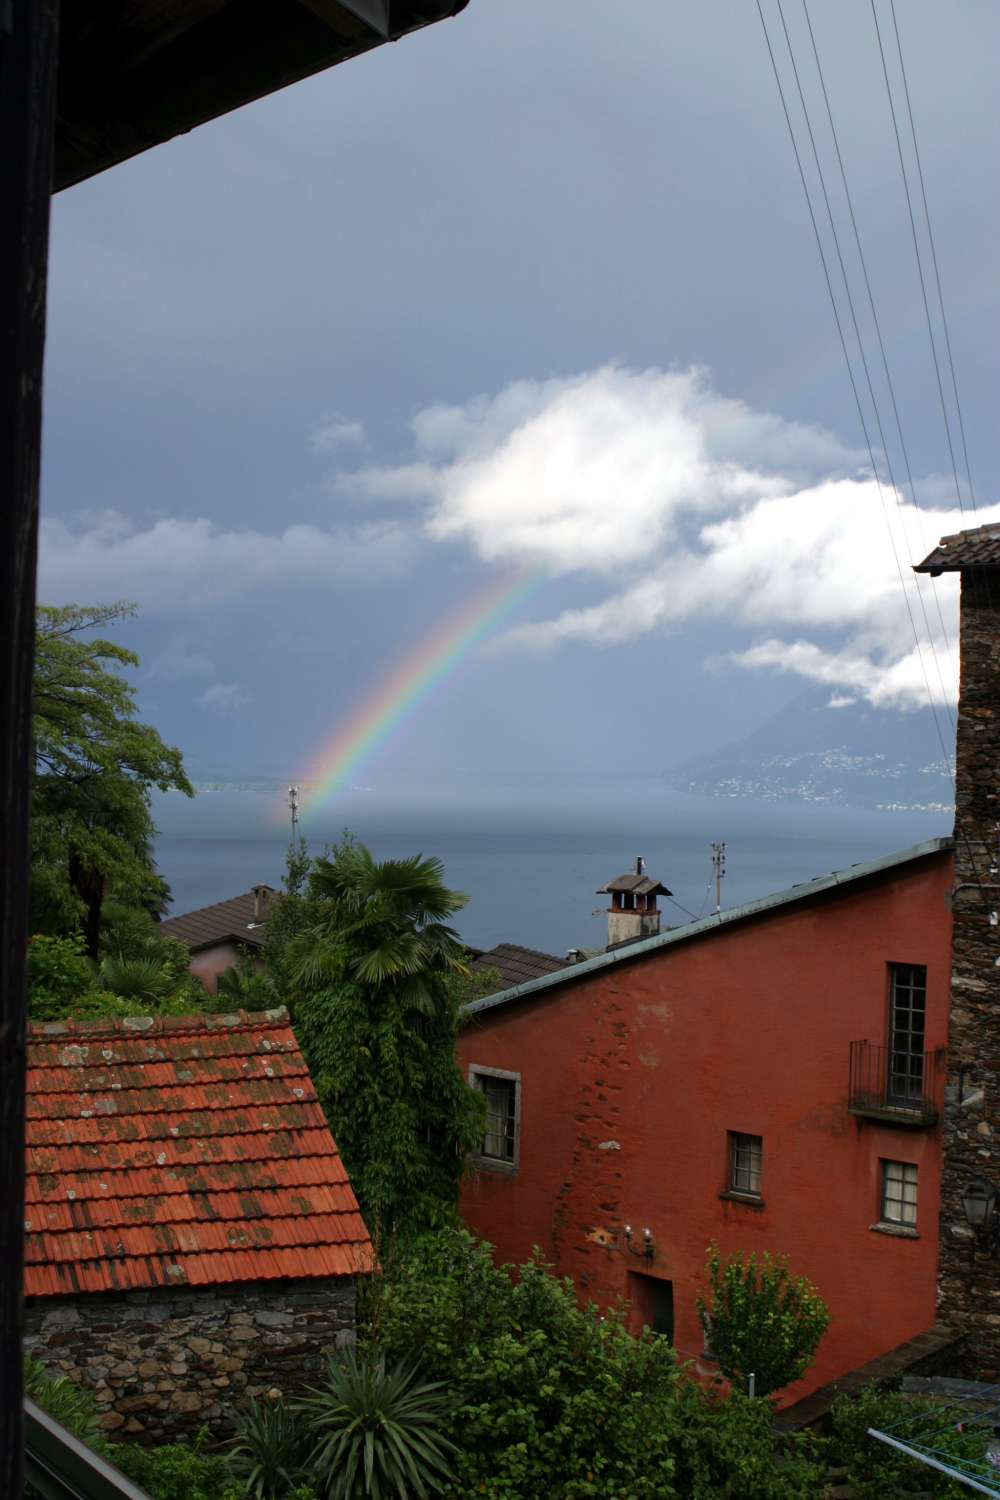 16:40 UT-Rainbow over Lago Maggiore: 110 KB; click on the image to enlarge at 1000x1500 pixels